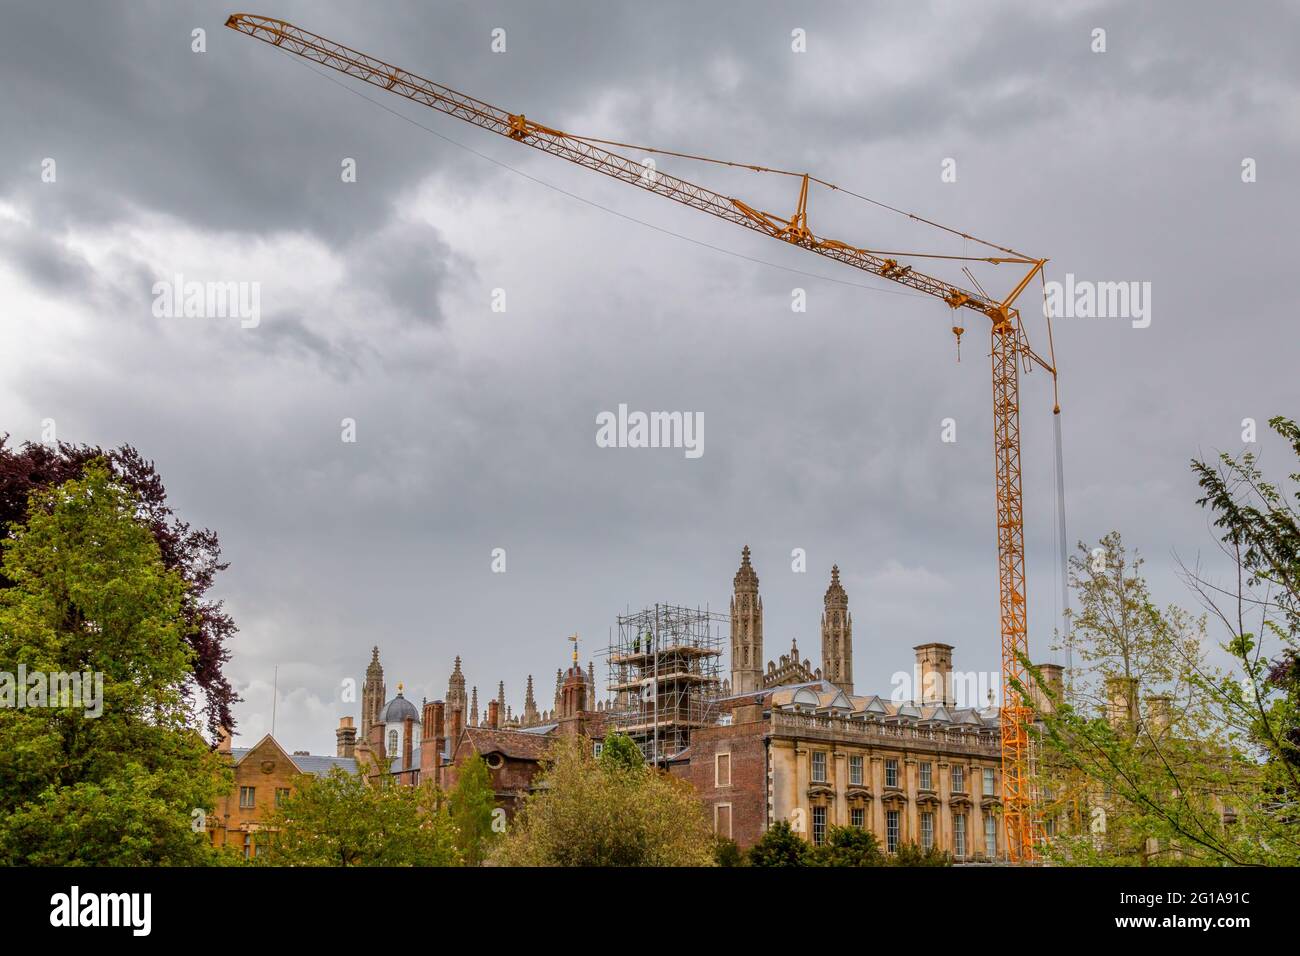 A  Potain IGOT85A Self Erecting Tower Crane, hired from Mantis Cranes, is used during construction work on the Old Court, Clare College, Cambridge, UK Stock Photo